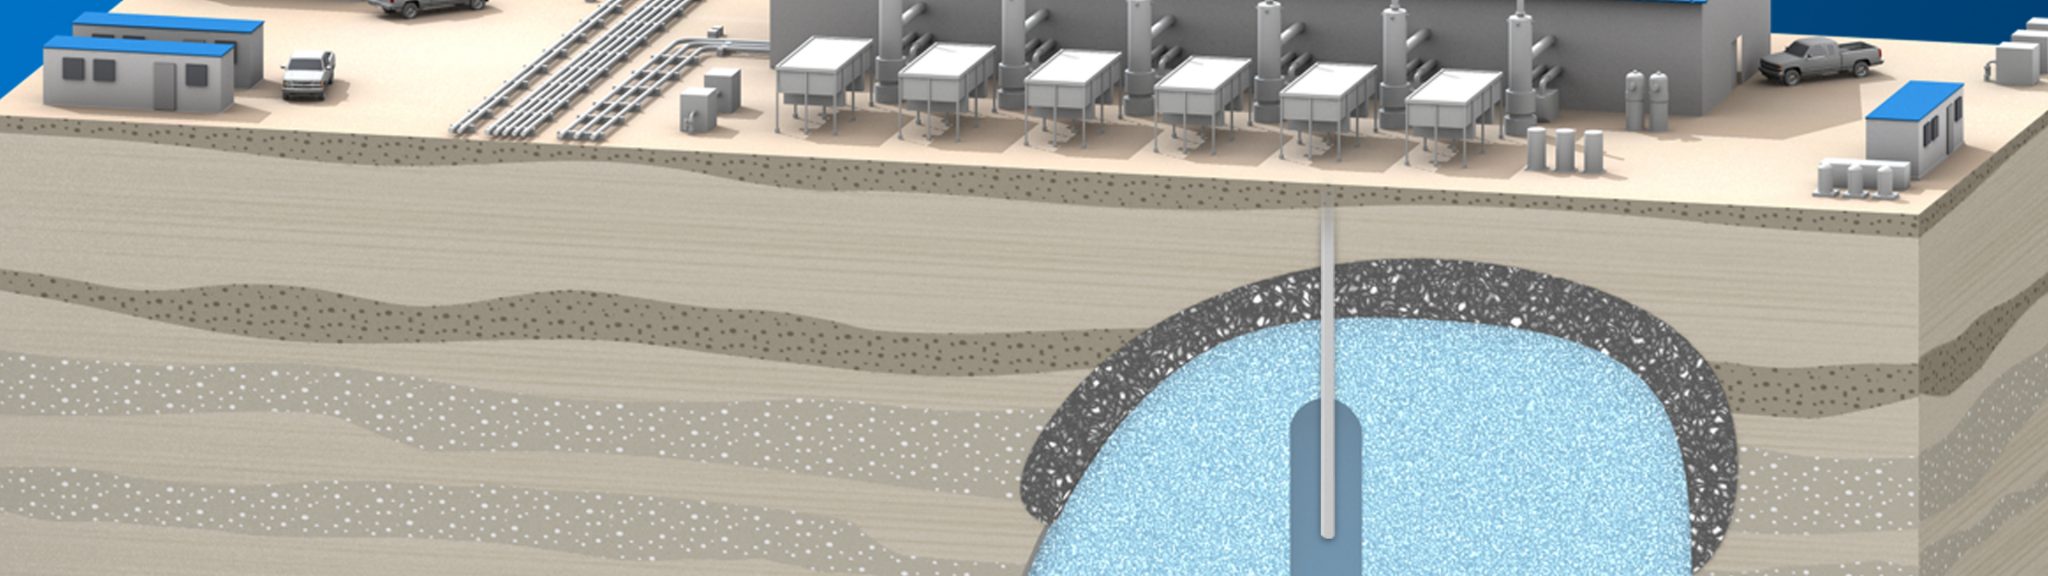 A rendering of natural gas being stored deep underground in a salt formation